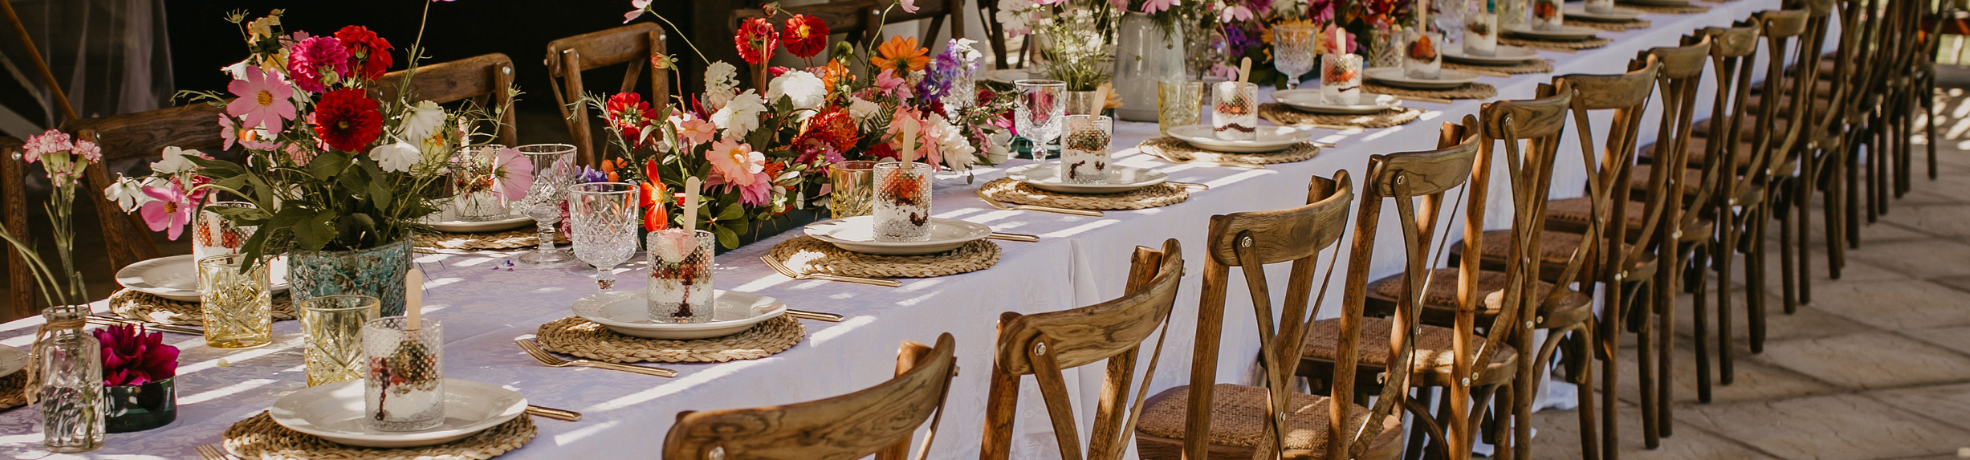 Table set with flowers and beautiful glasses and dishes for a fancy party.